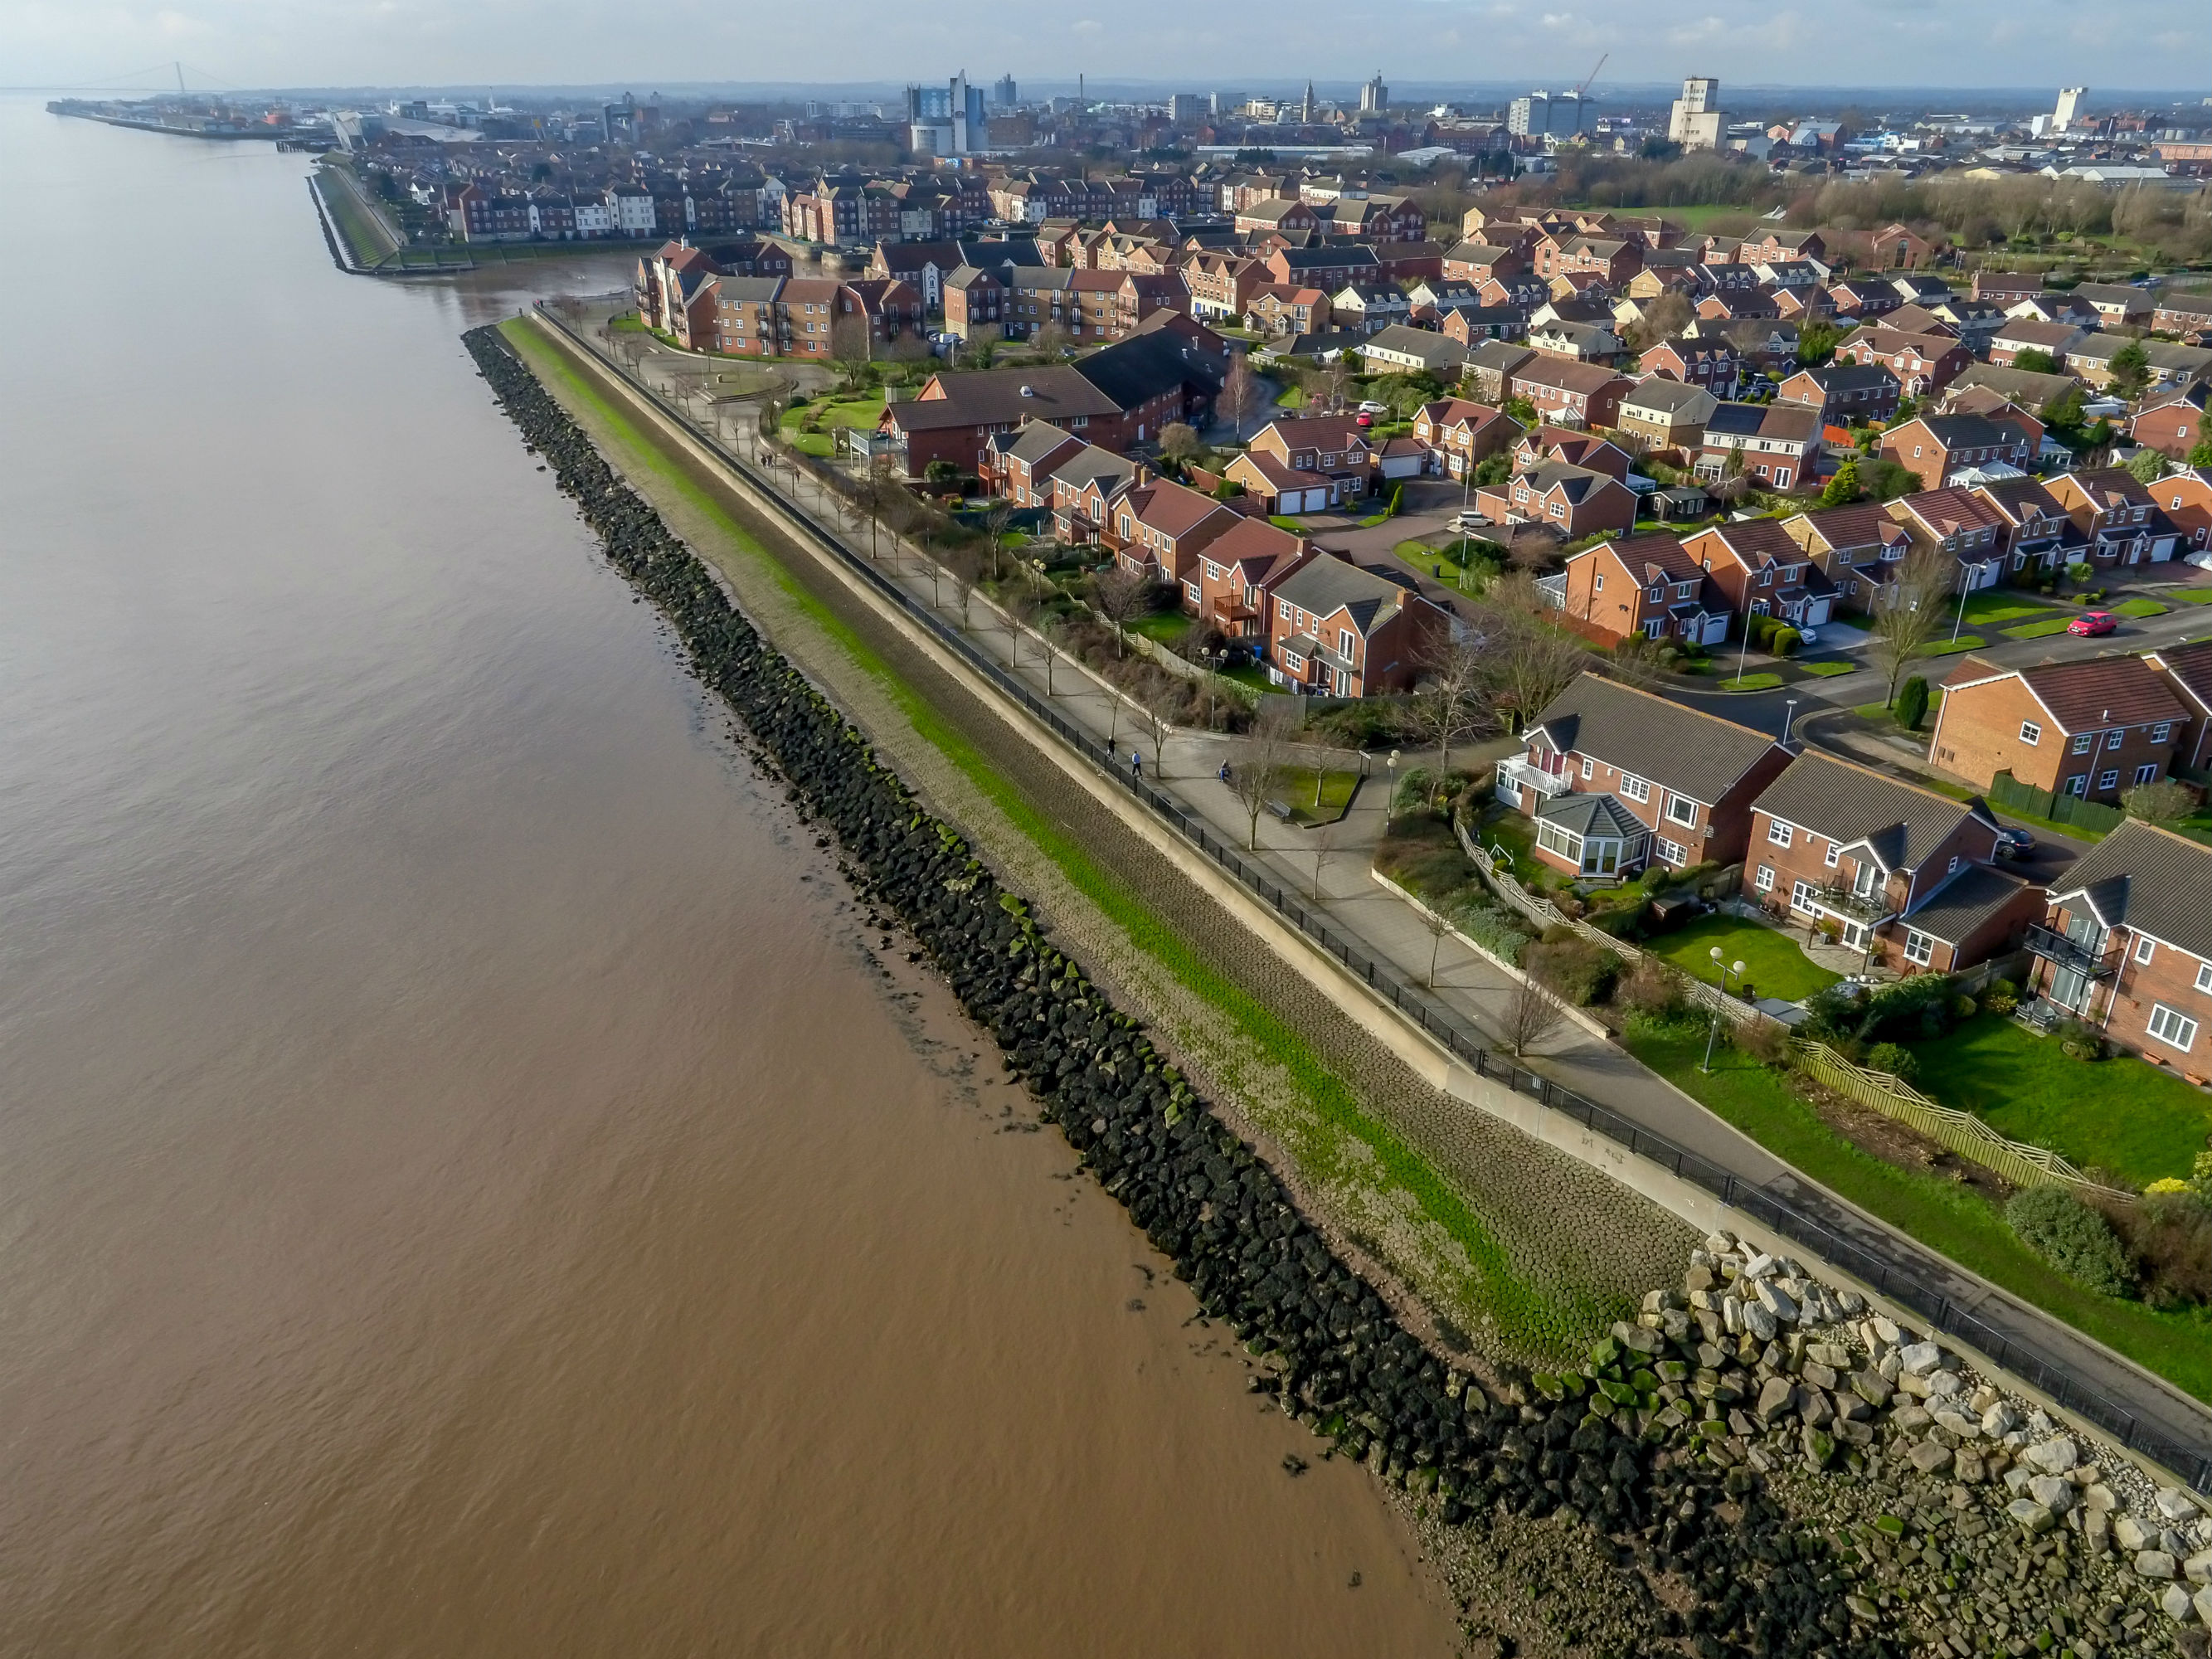 A £42 million investment in the city will see the height of defences raised along more than four miles of the Humber foreshore, from St Andrew’s Quay and Victoria Dock Village.